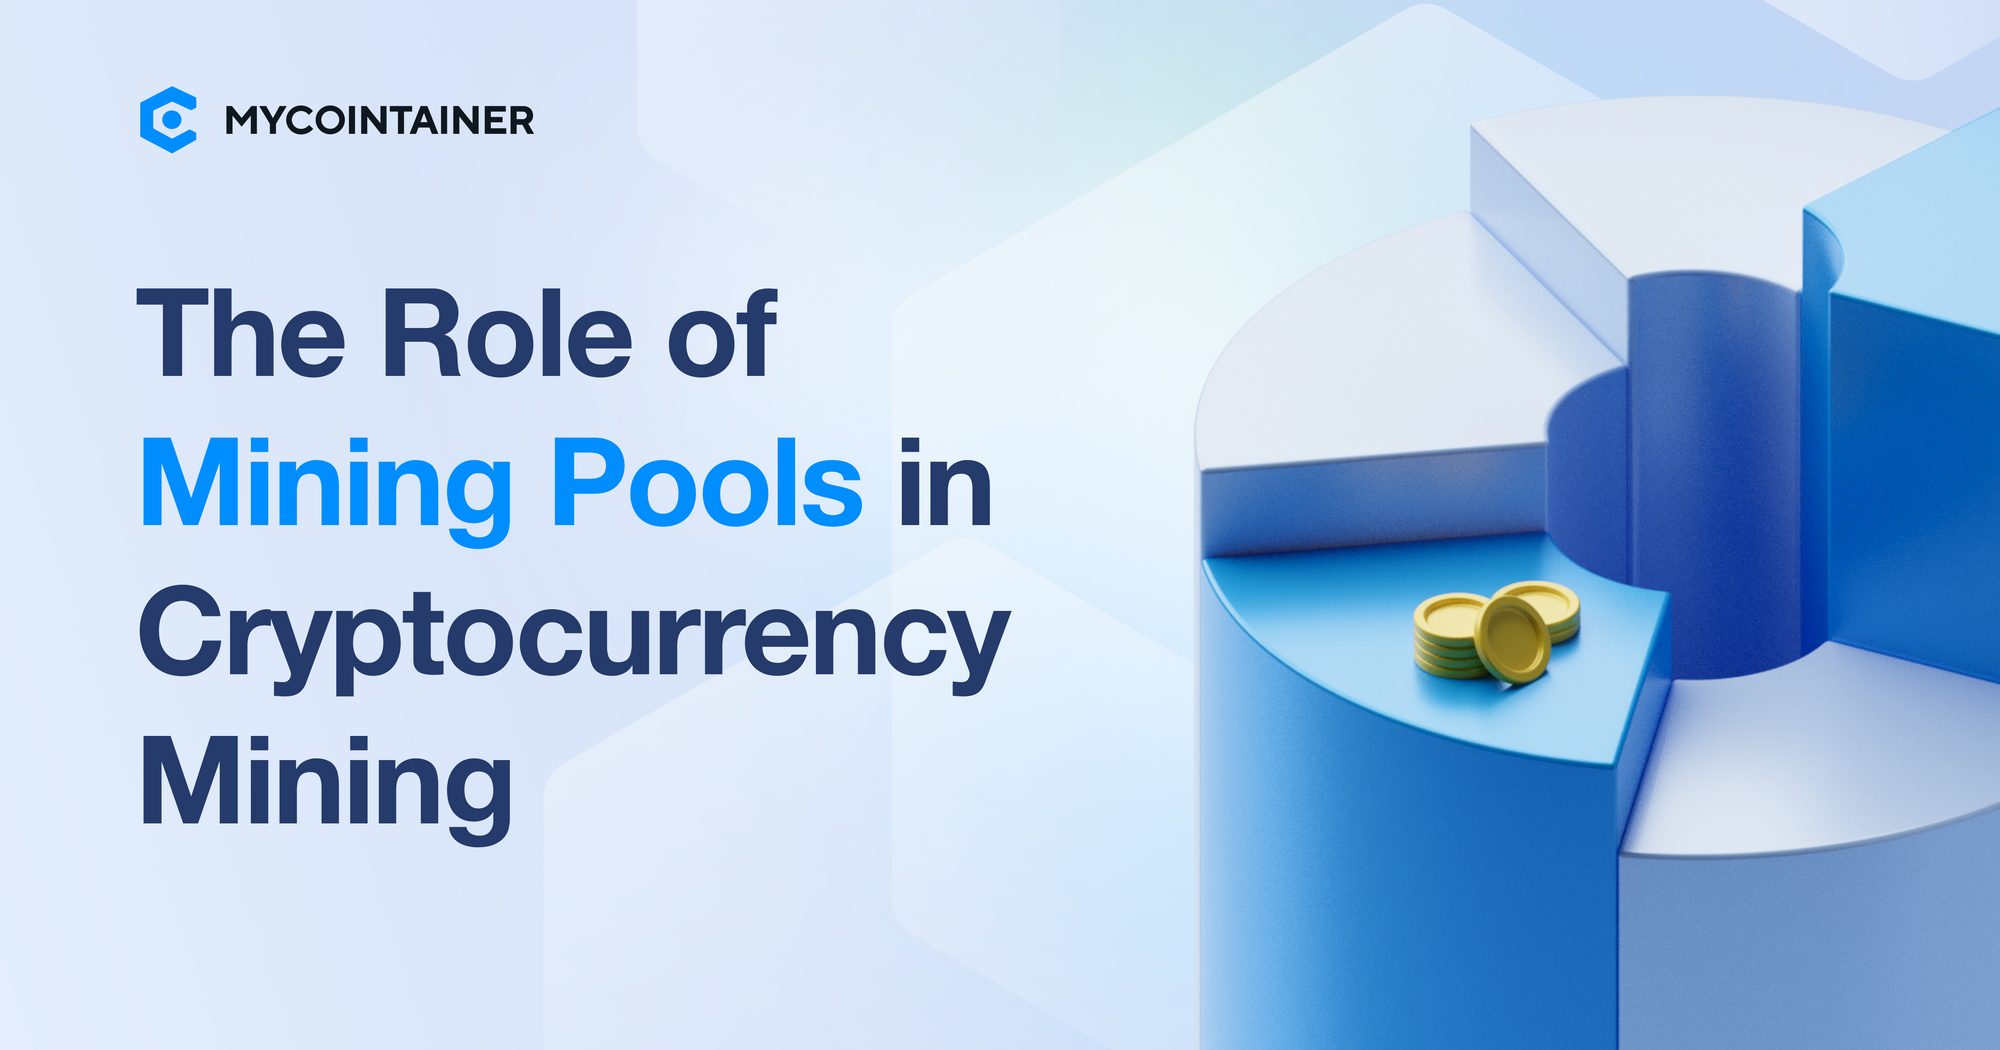 The Role of Mining Pools in Cryptocurrency Mining